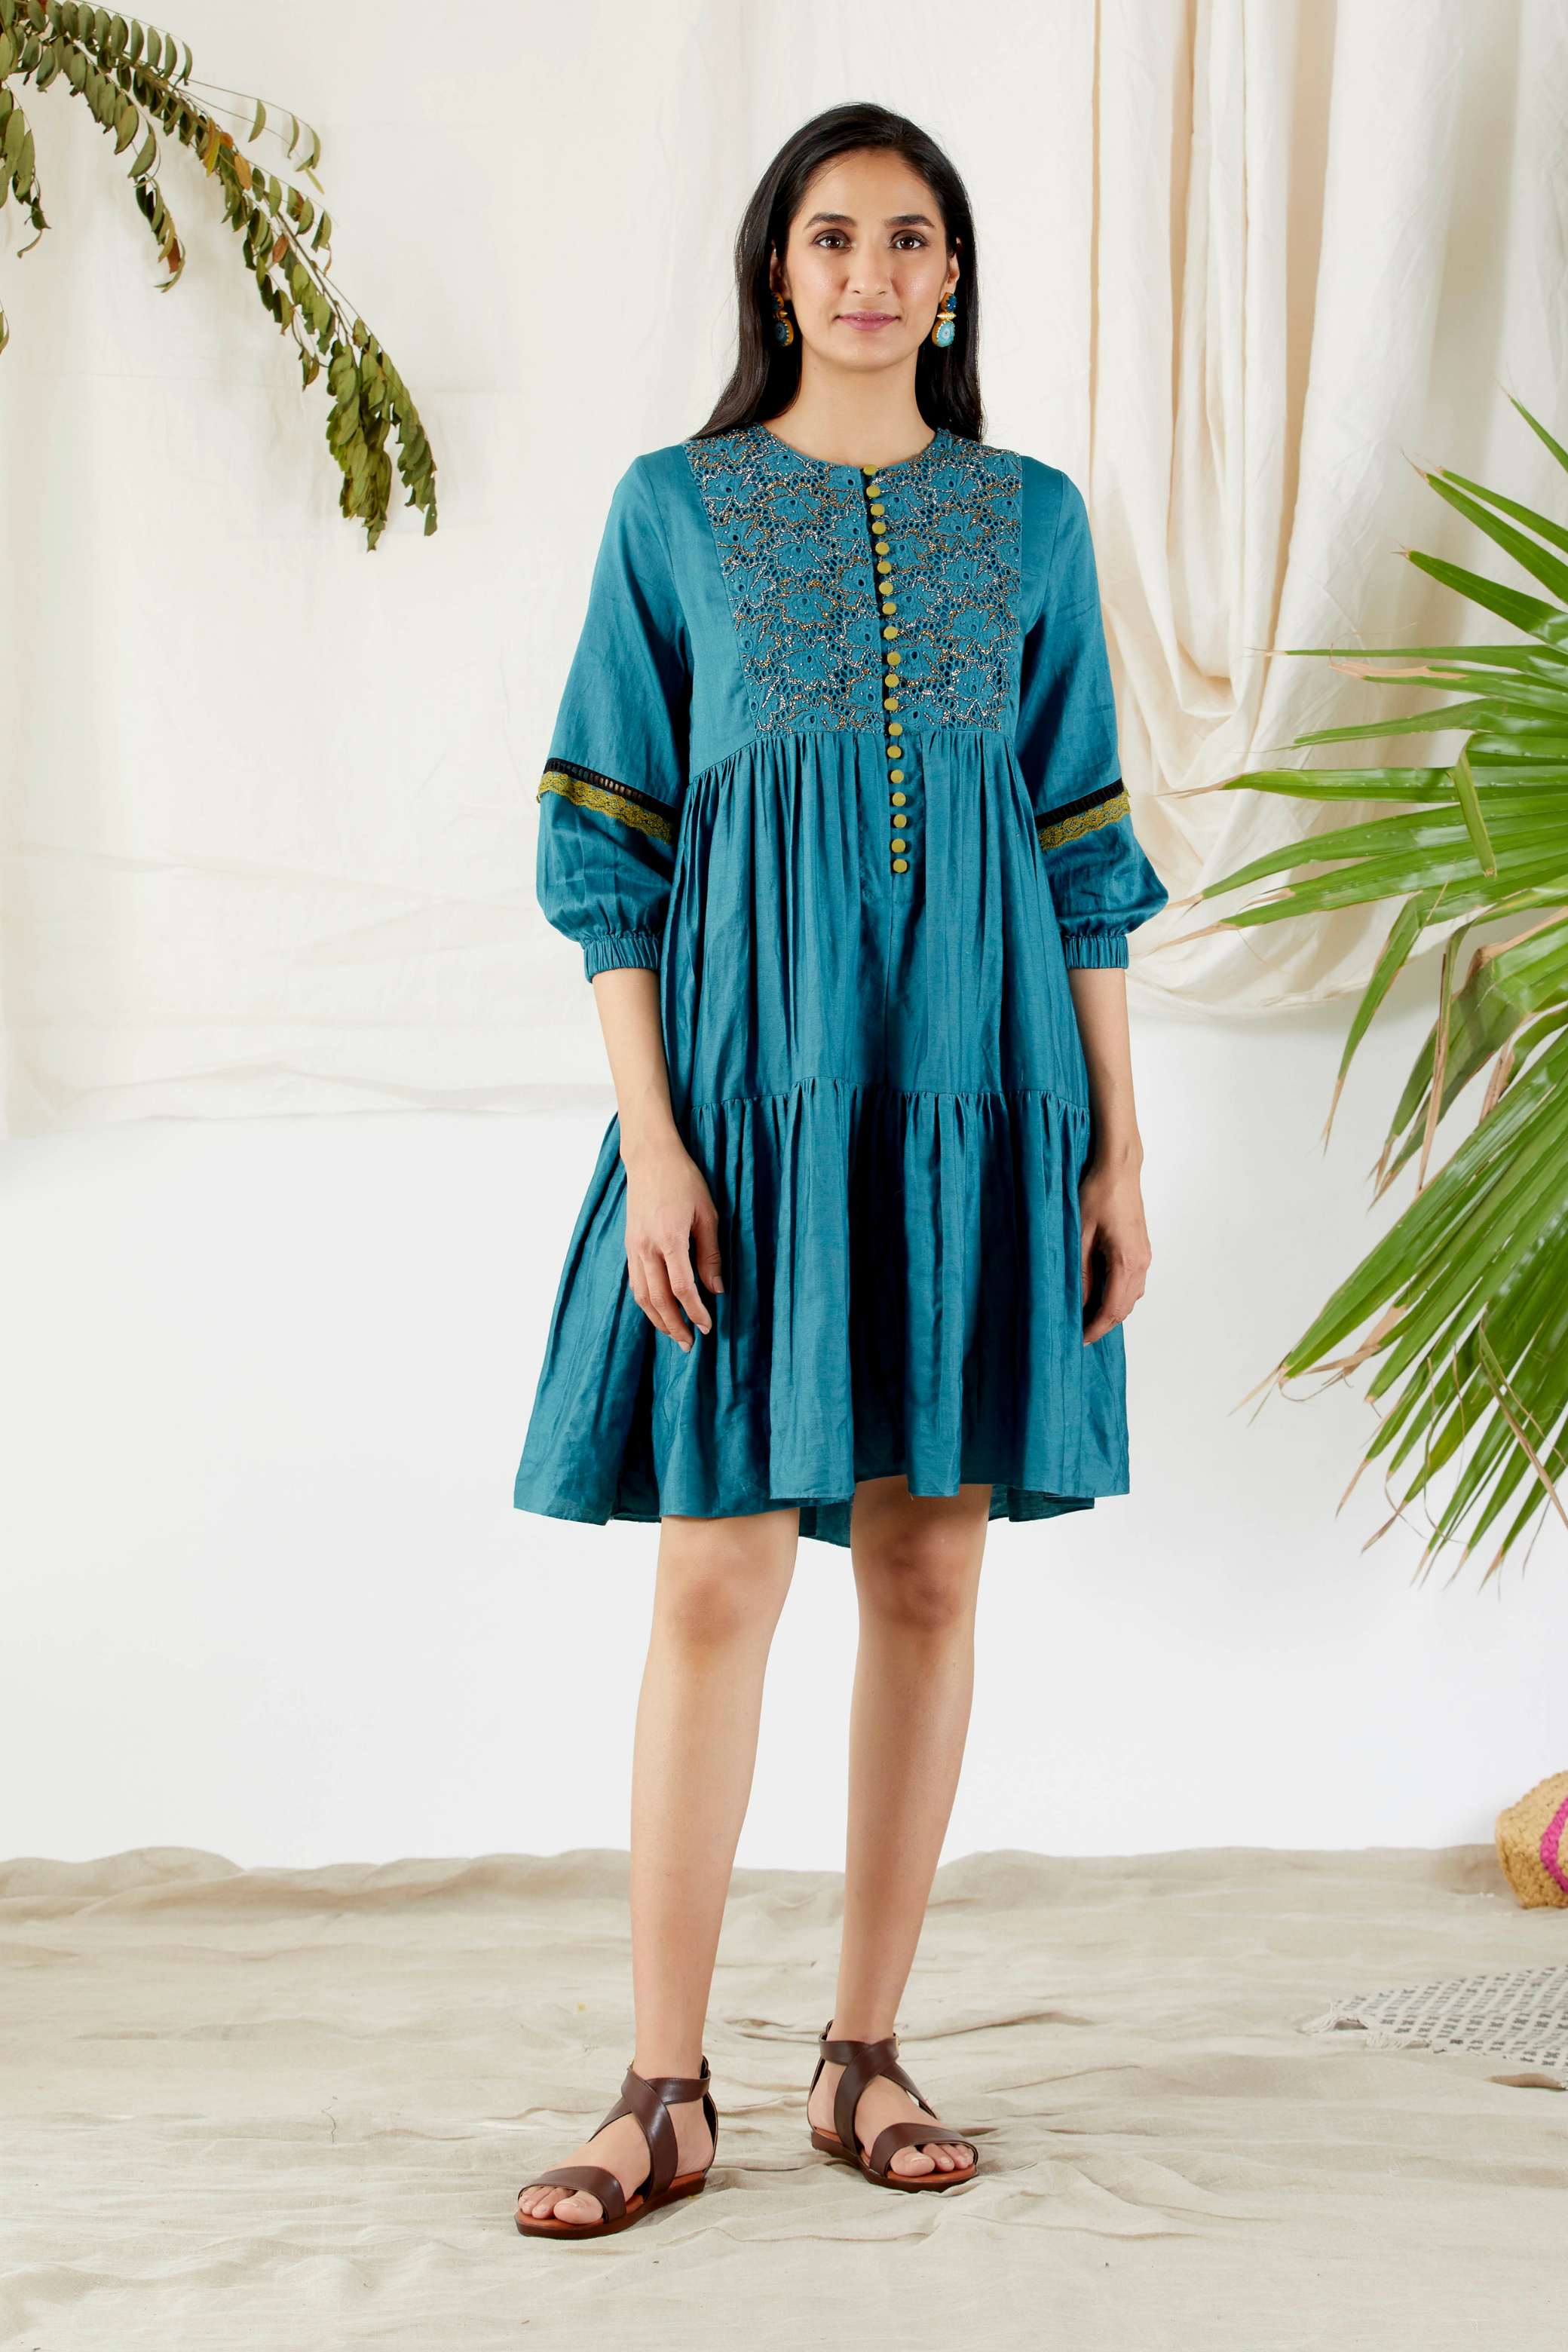 The tiered dress with cut work yoke